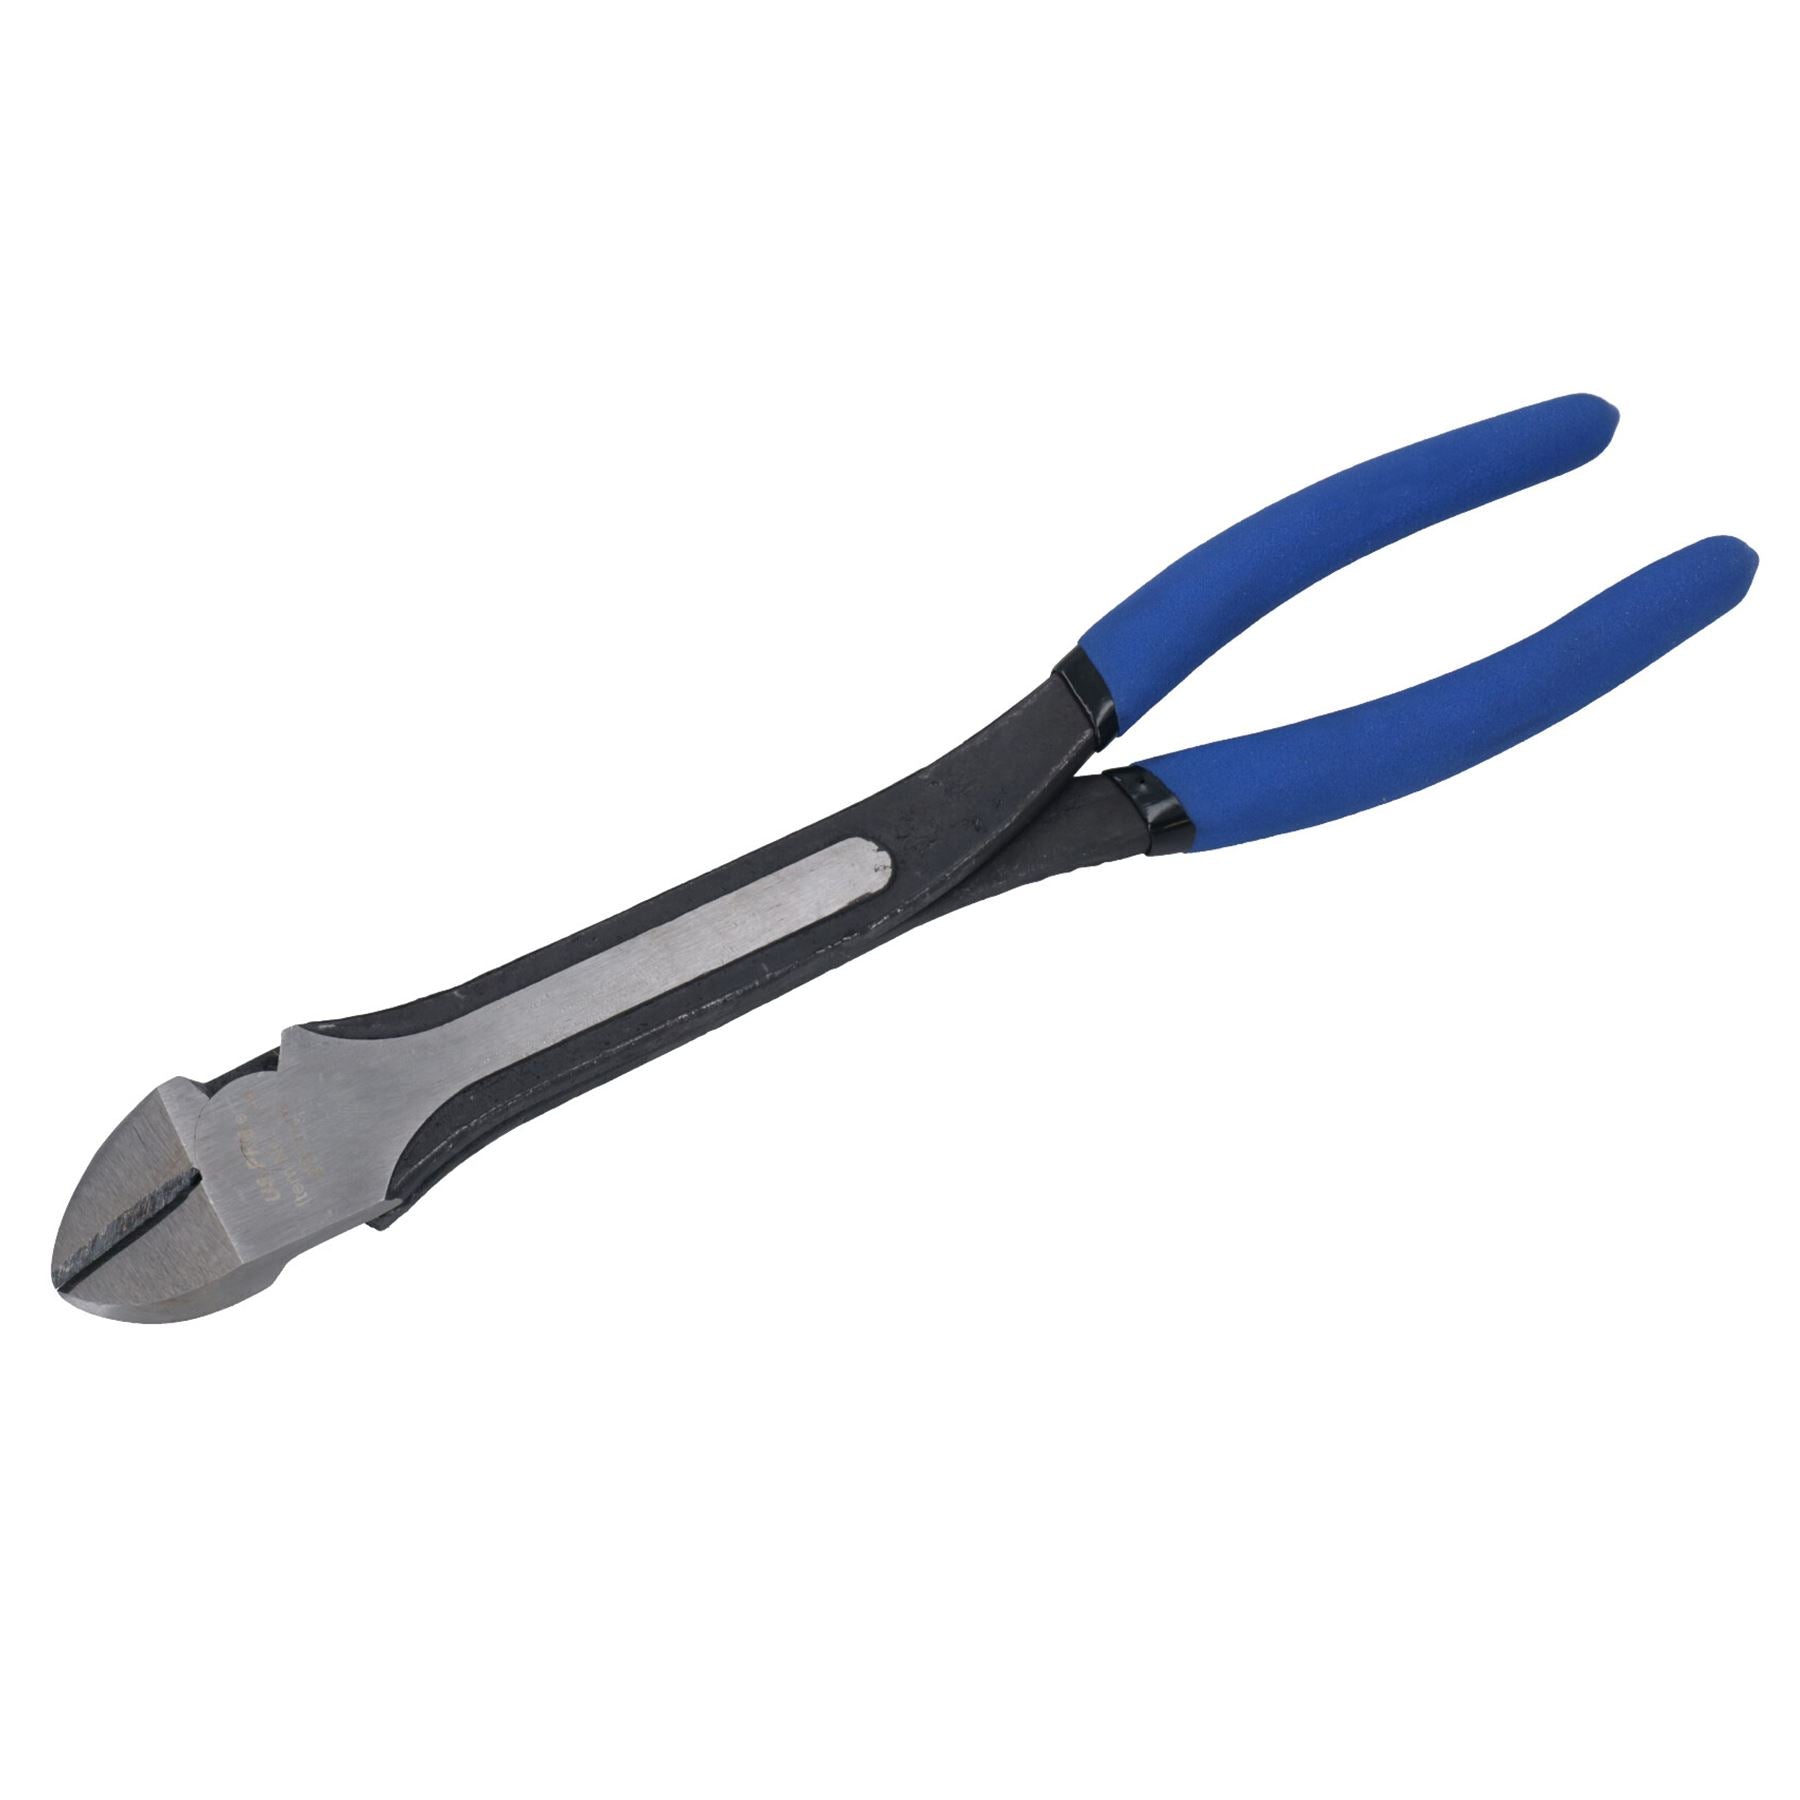 Cutting pliers side diagonal cutters wire cable snips 11" / 280mm Fishing AT140